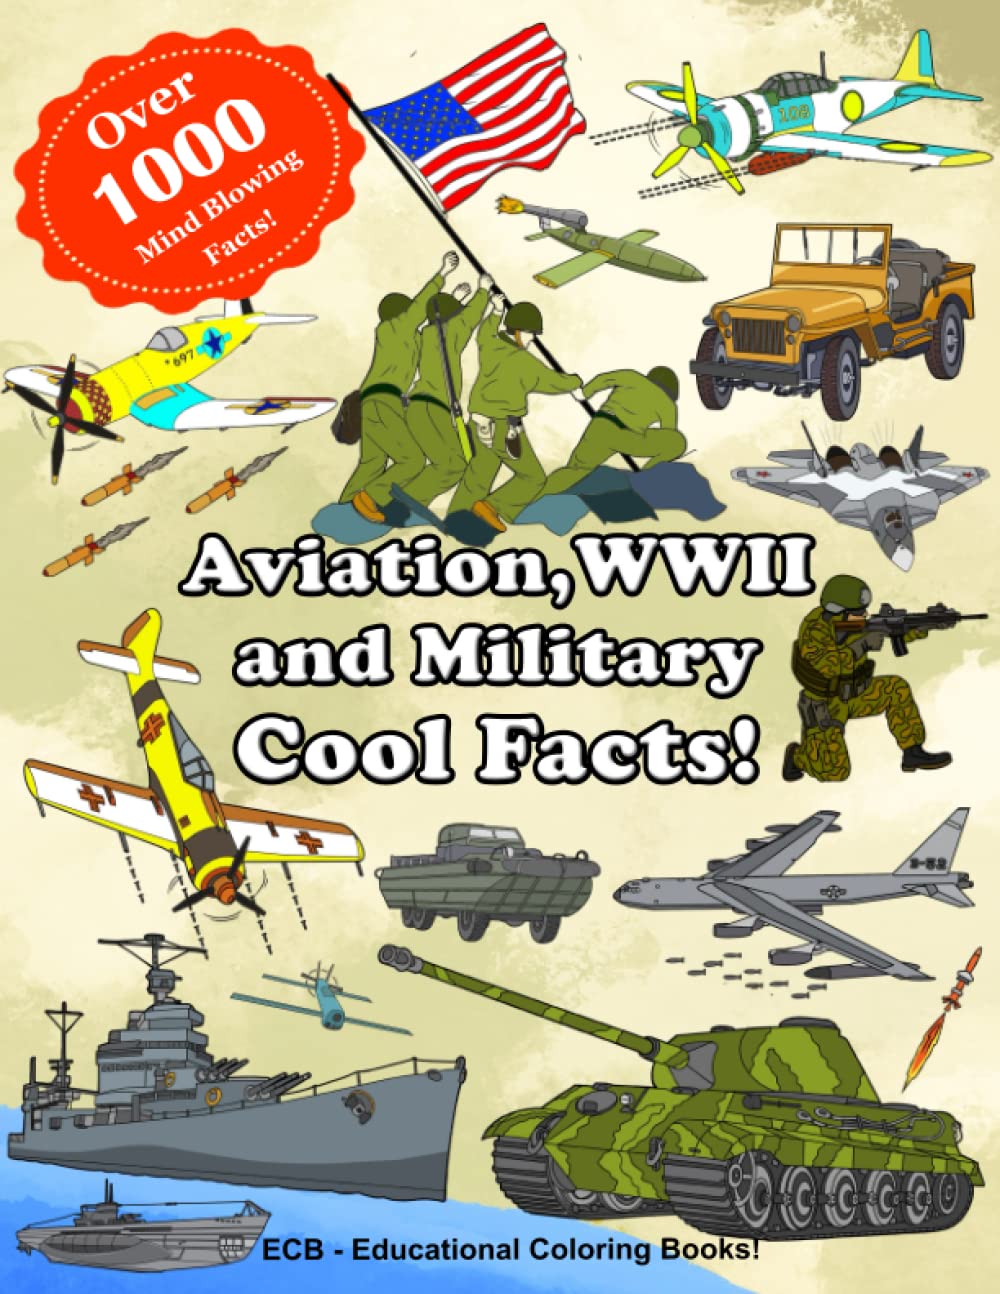 Aviation, WWII and Military Cool Facts!: – Over 1,000 amazing and educational facts about WWII history, technology and aircraft, current and future ... best and most famous airliners in the world!